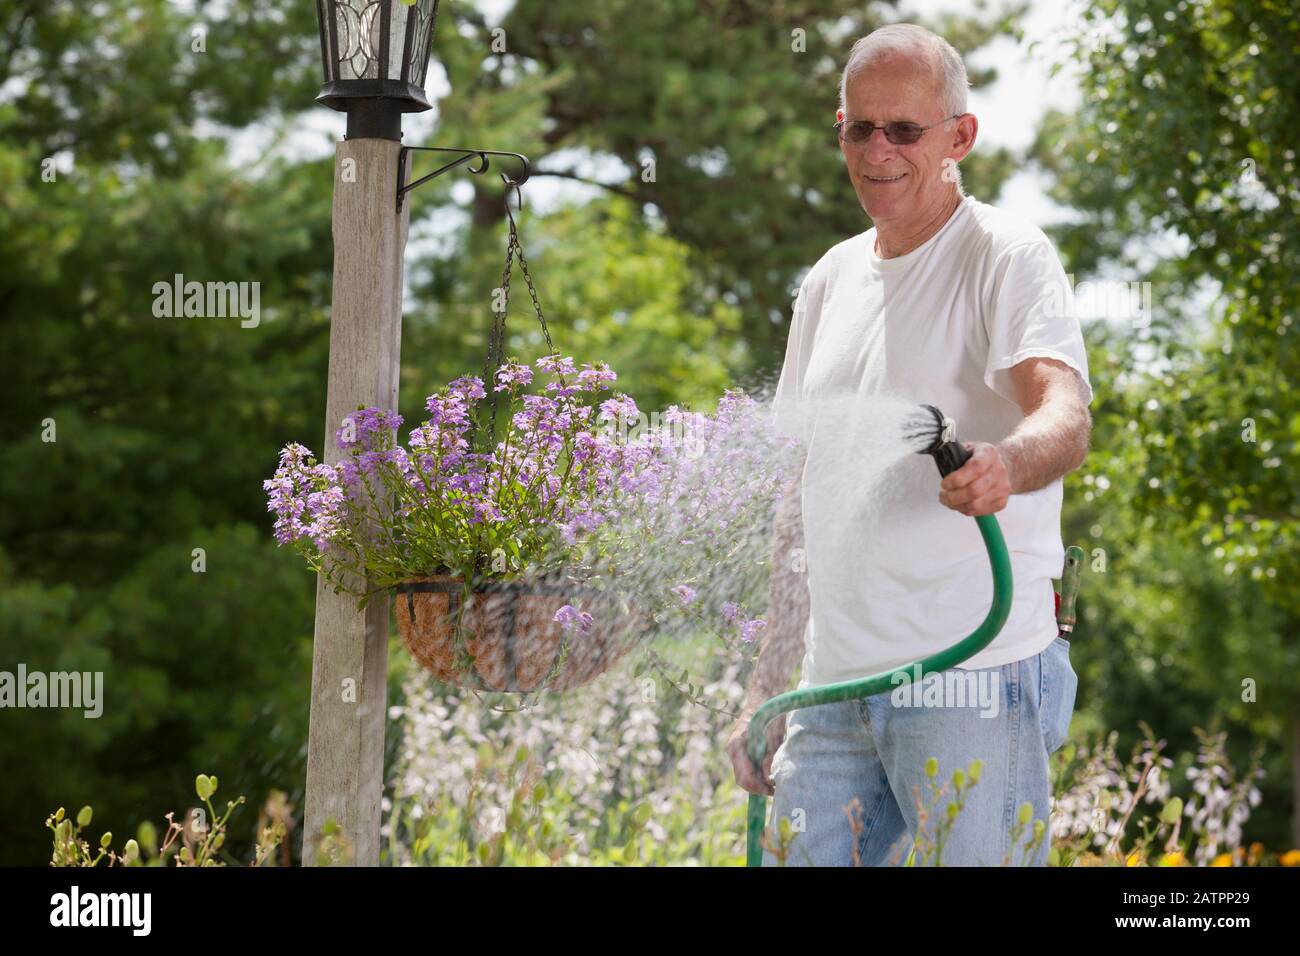 Man watering a hanging flower basket with a hose in his garden Stock Photo